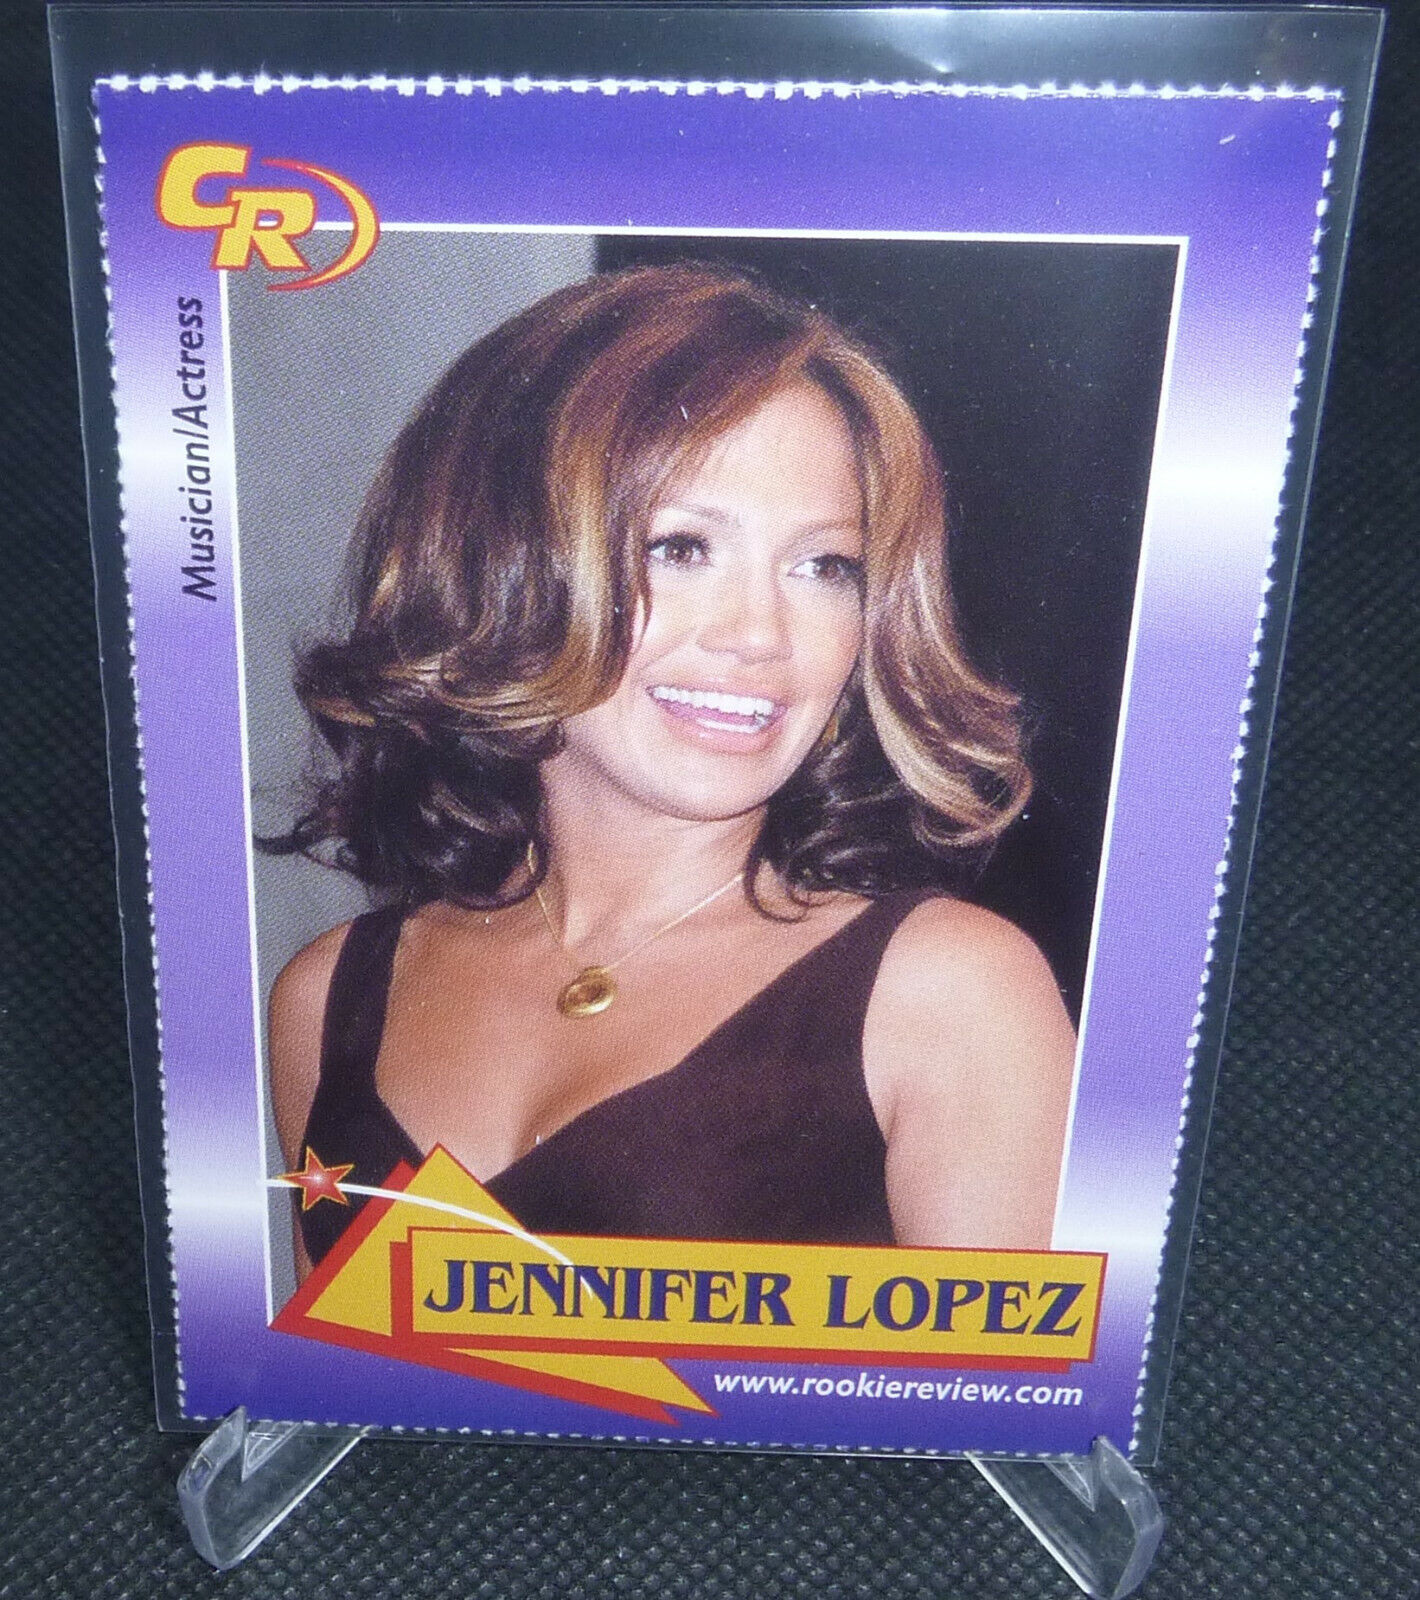 2003 Celebrity Review Rookie Review Jennifer Lopez Musician Actress Card #6